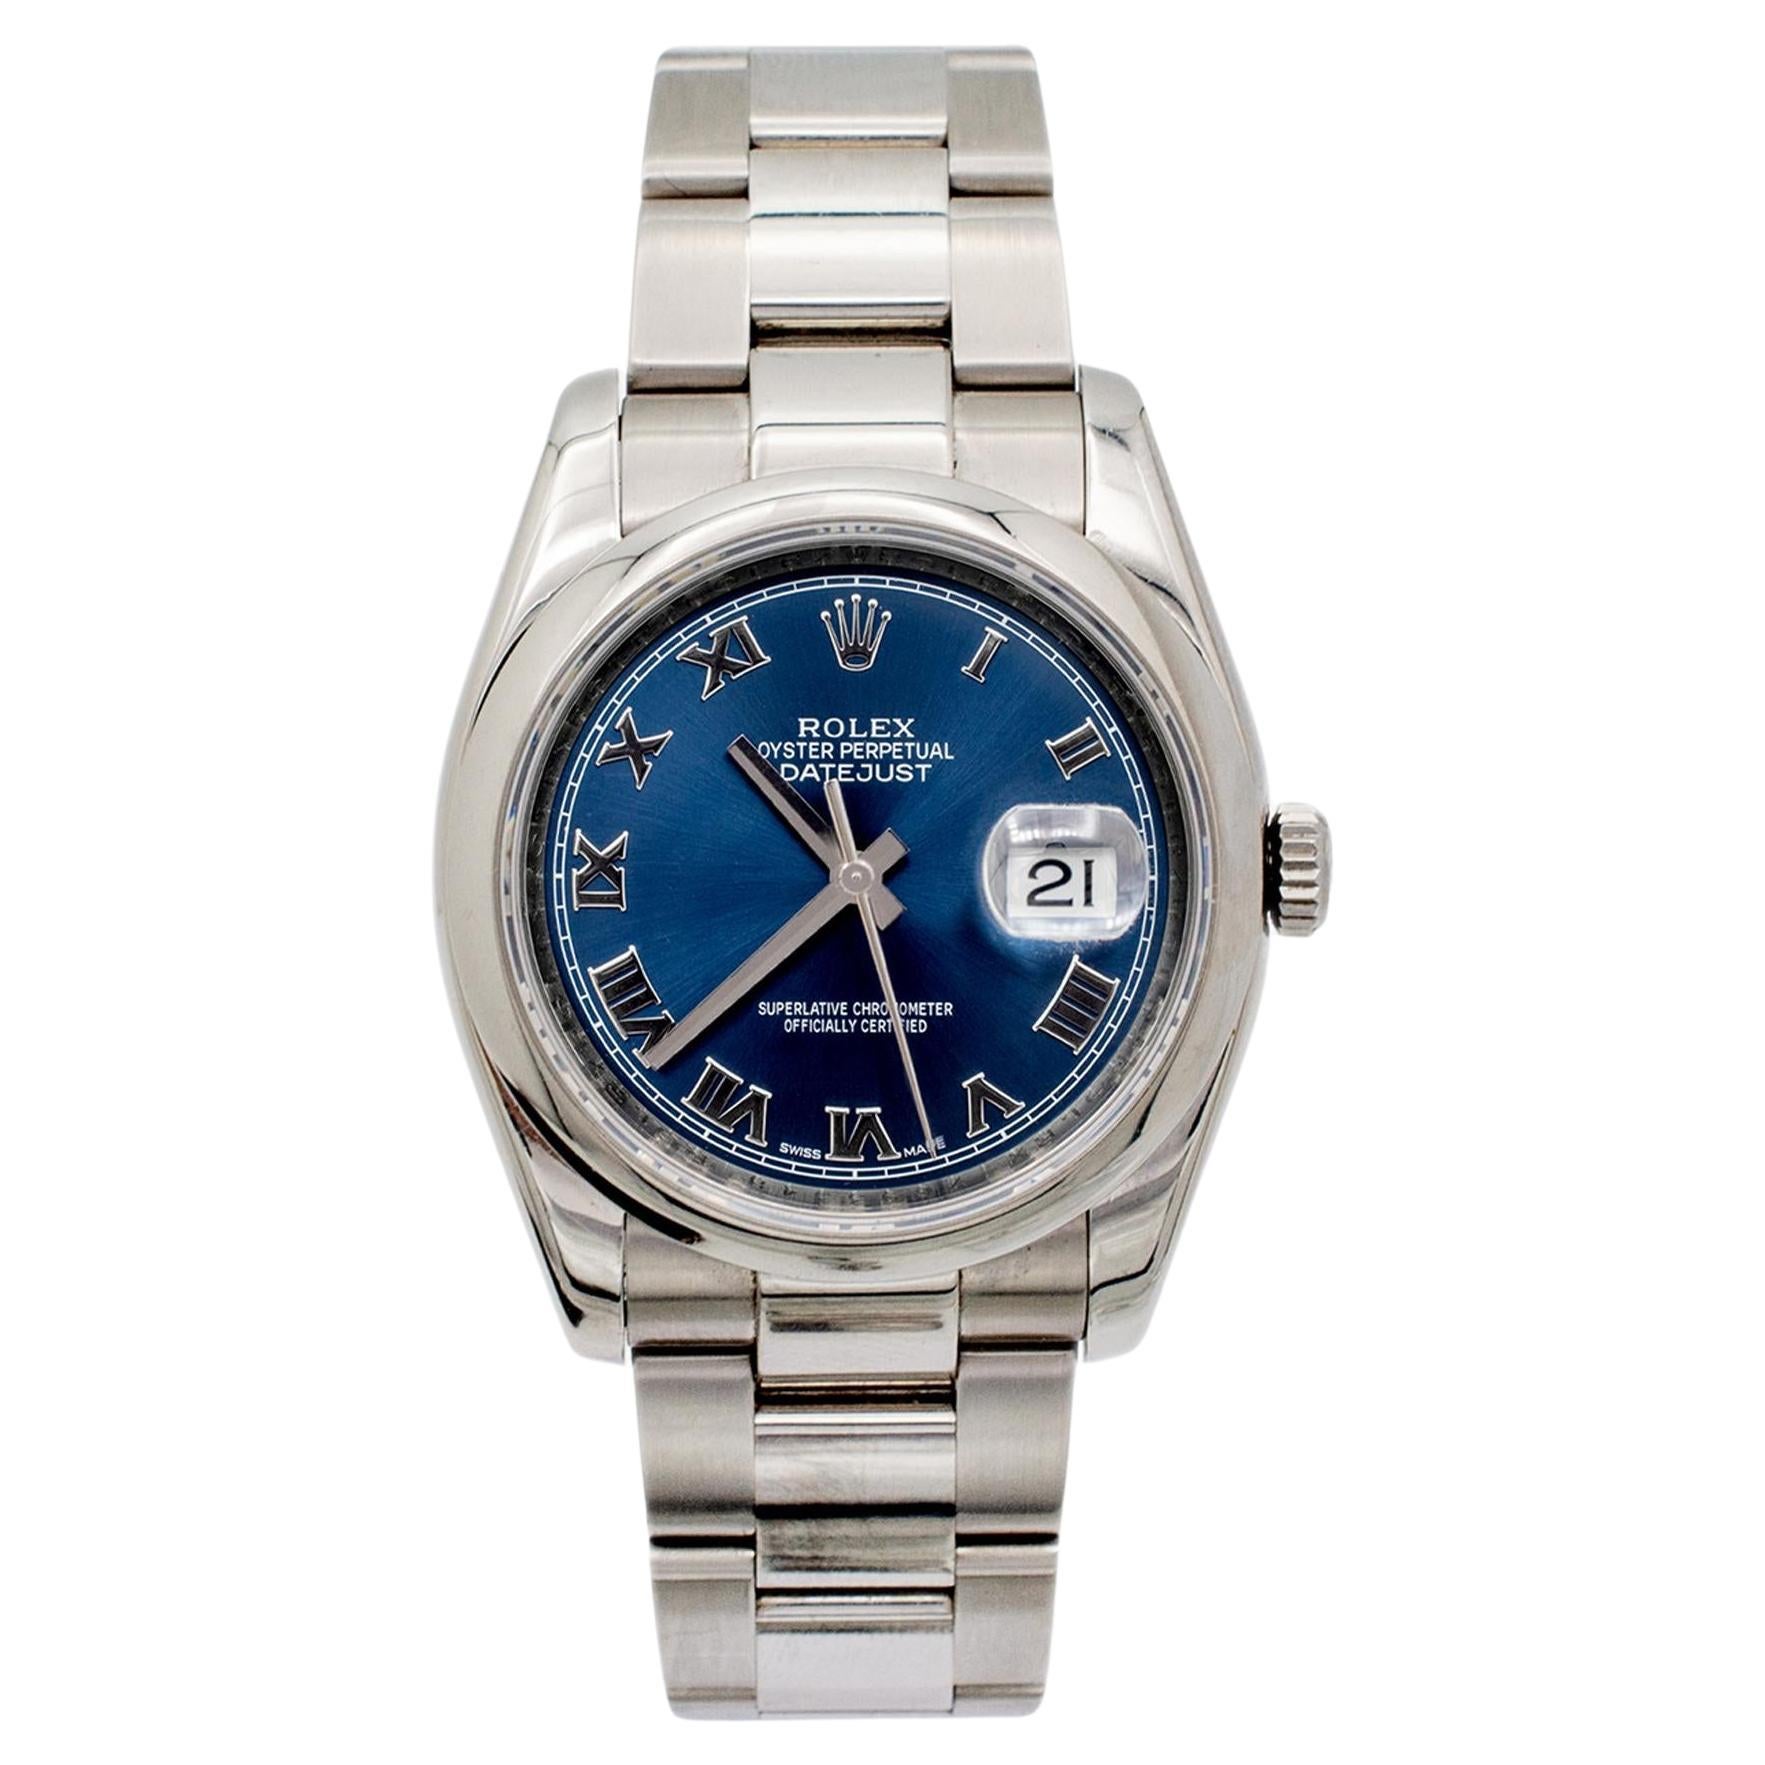 2006 Rolex Datejust 36MM 116200 Blue Roman Dial Oyster Stainless Steel Watch For Sale